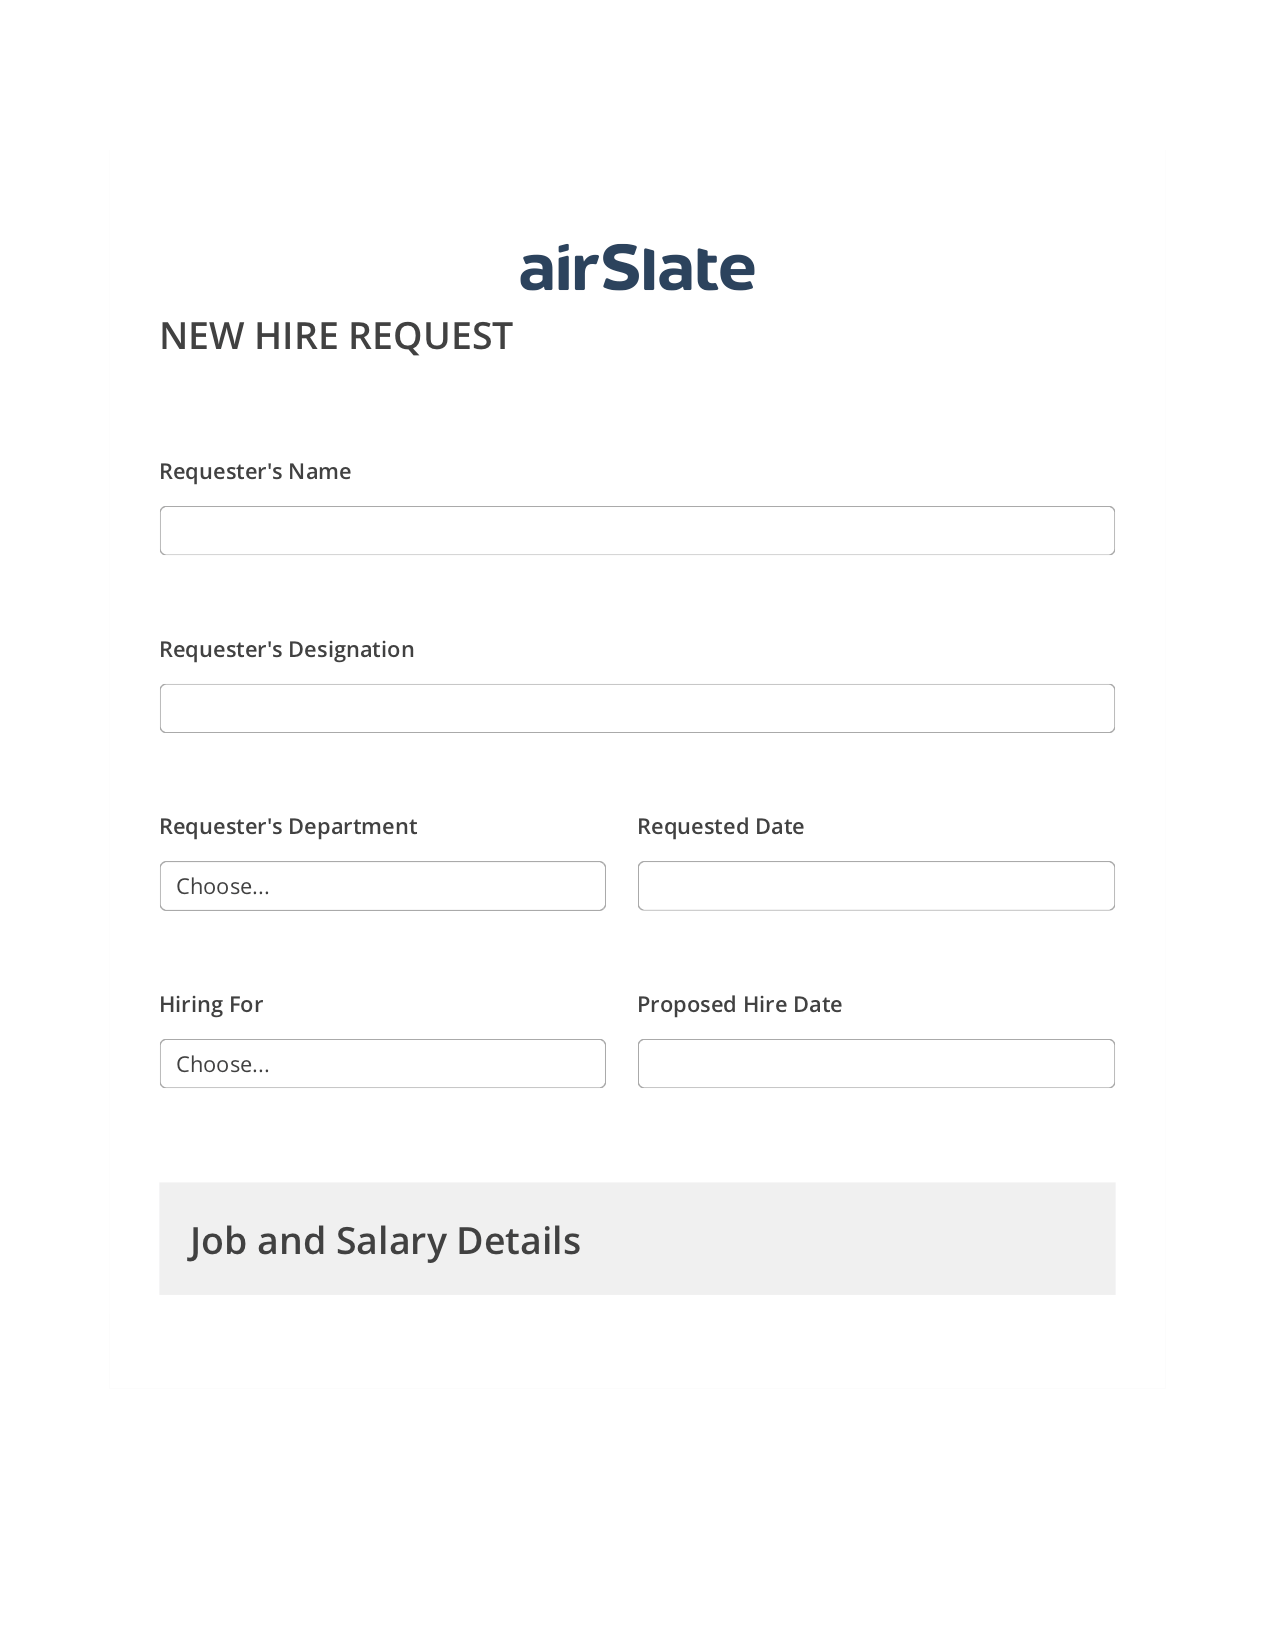 Hiring Request Workflow Pre-fill from AirTable Bot, Update MS Dynamics 365 Record Bot, Text Message Notification Postfinish Bot